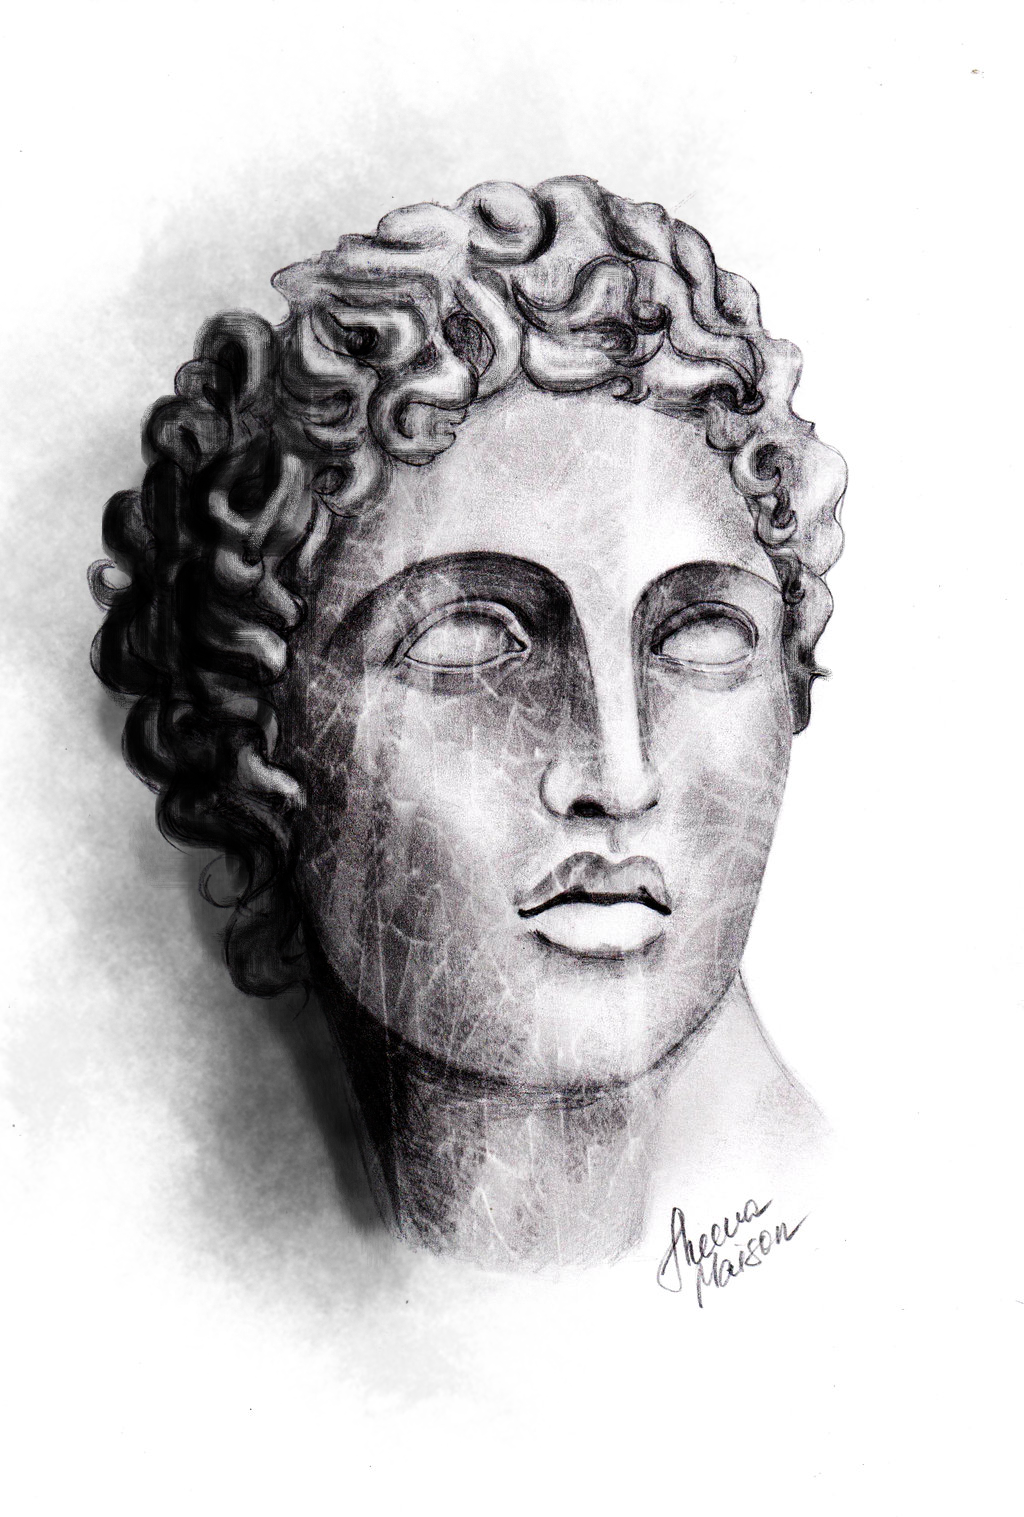 A pencil drawing of Alexander the... - Alexander the Great | Facebook